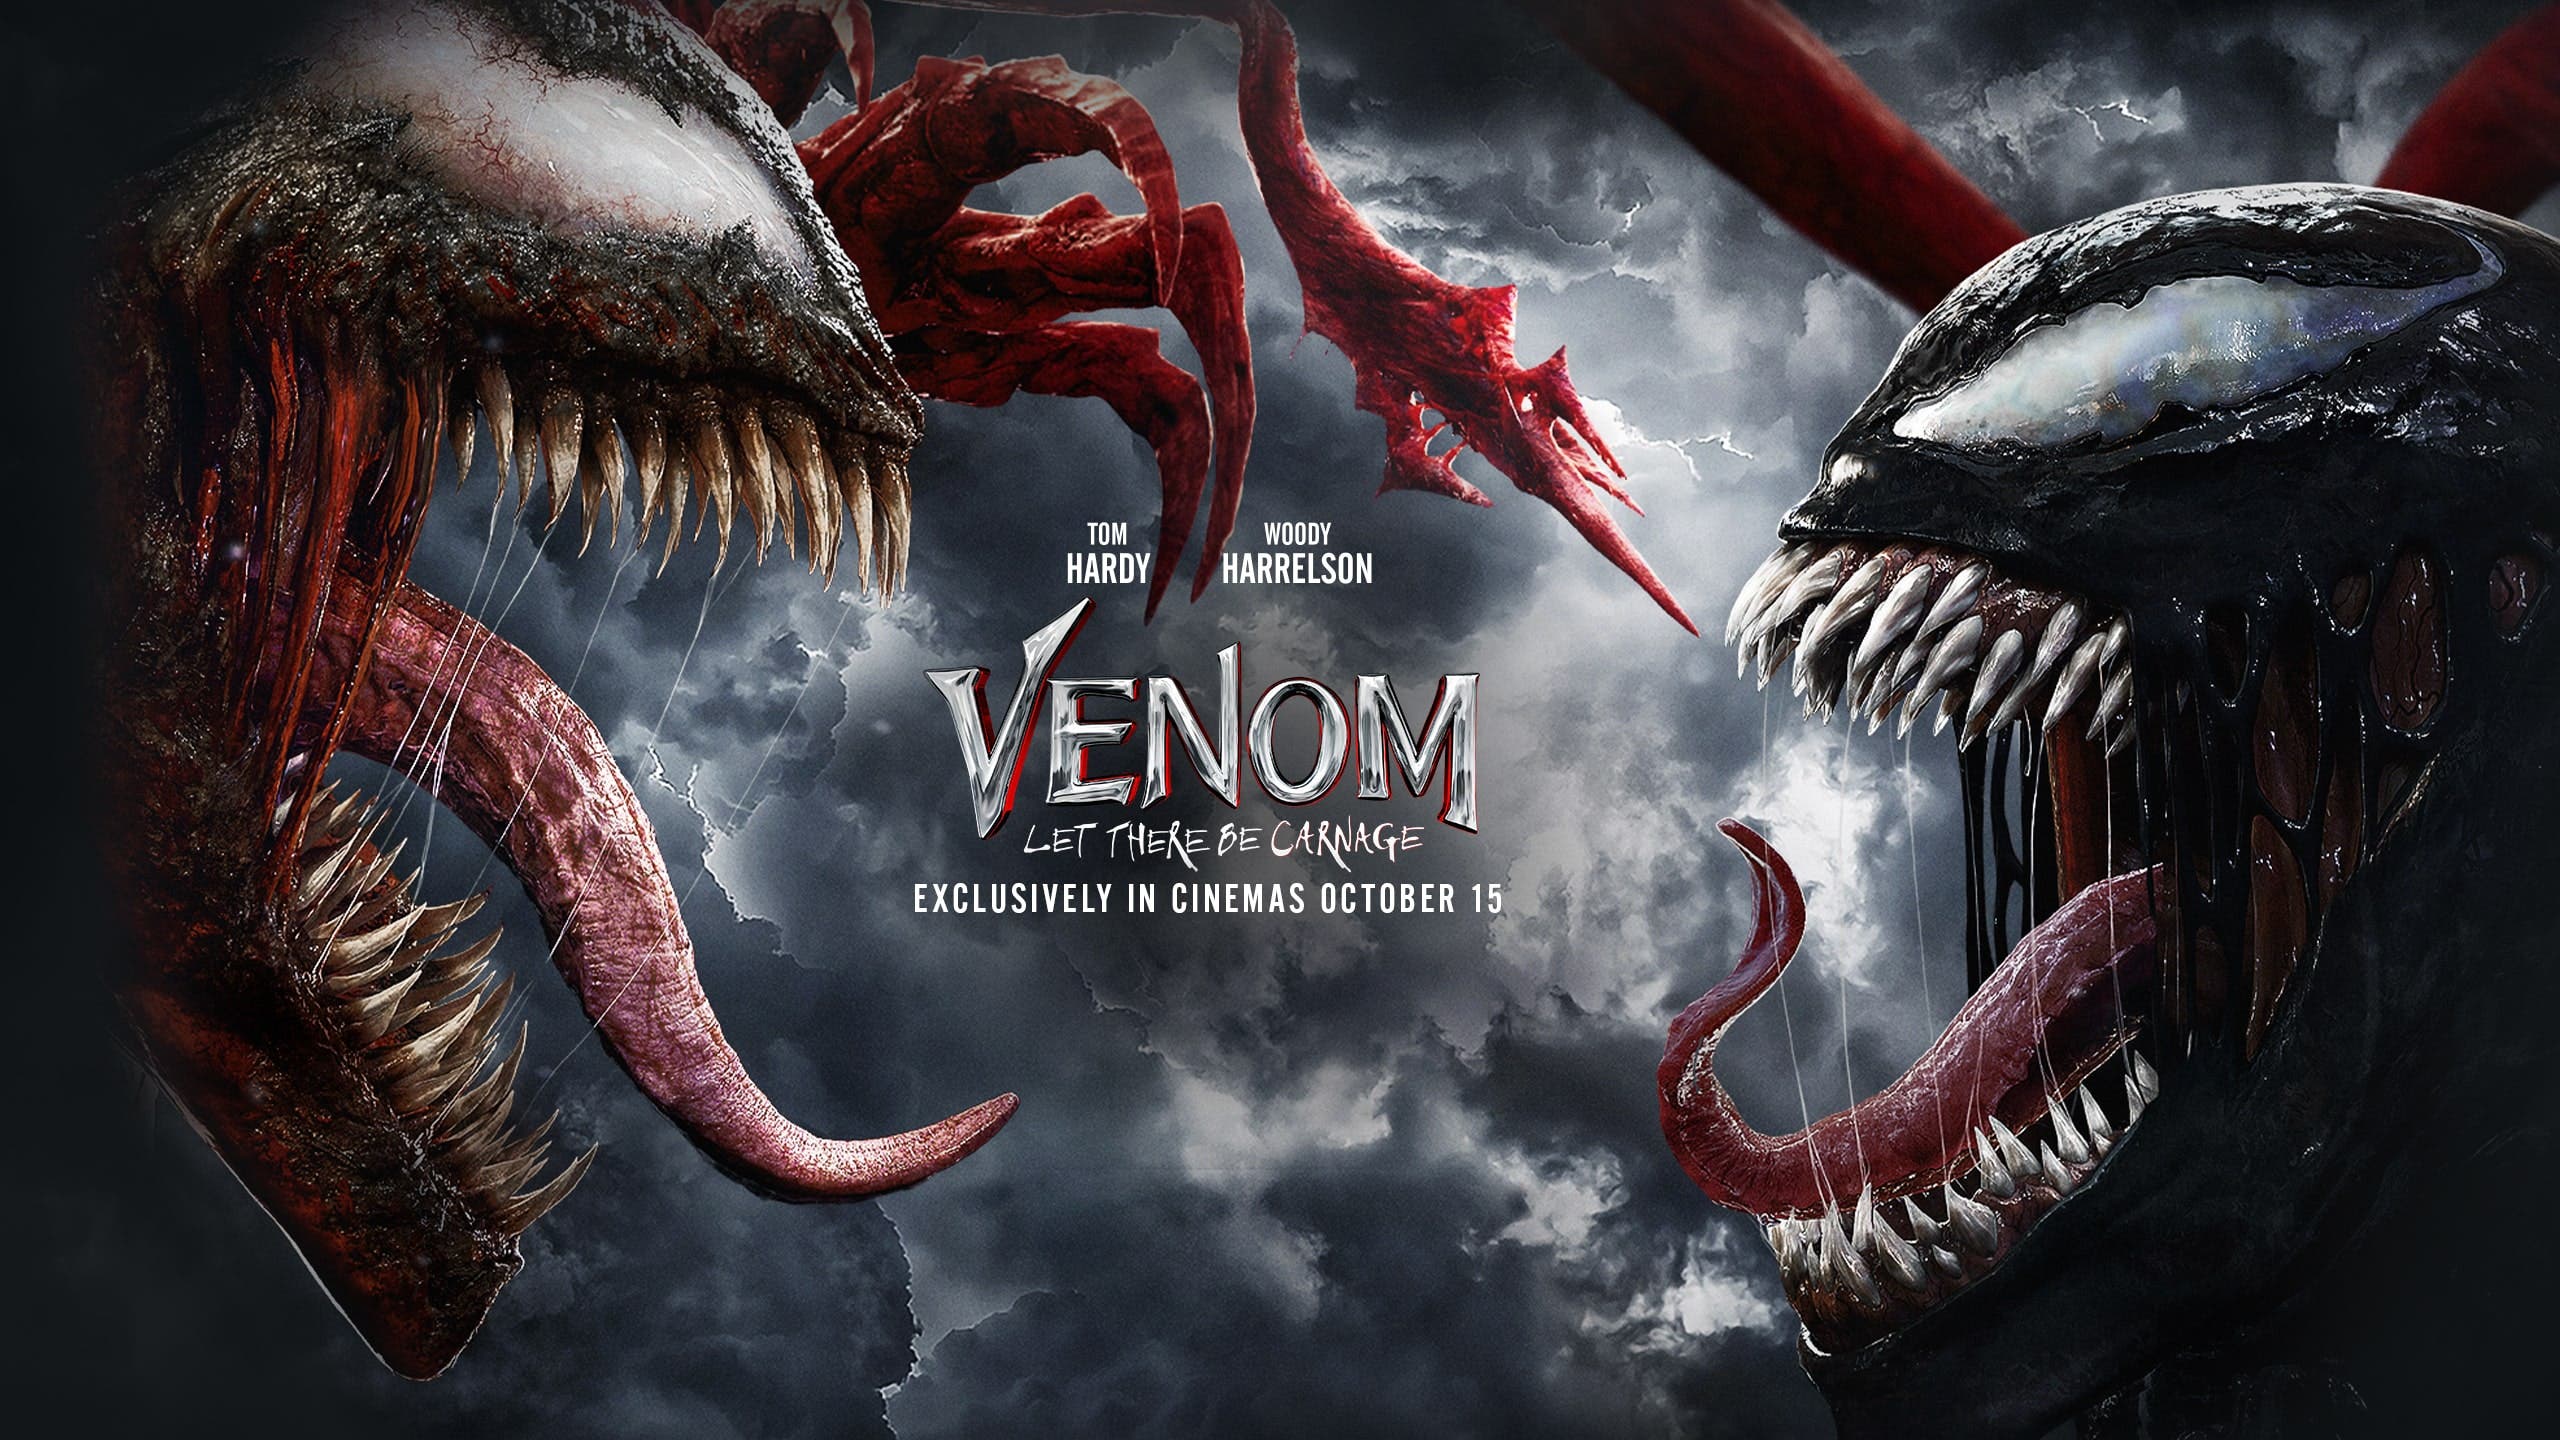 VENOM LET THERE BE CARNAGE Gets Digital and Physical Release Dates